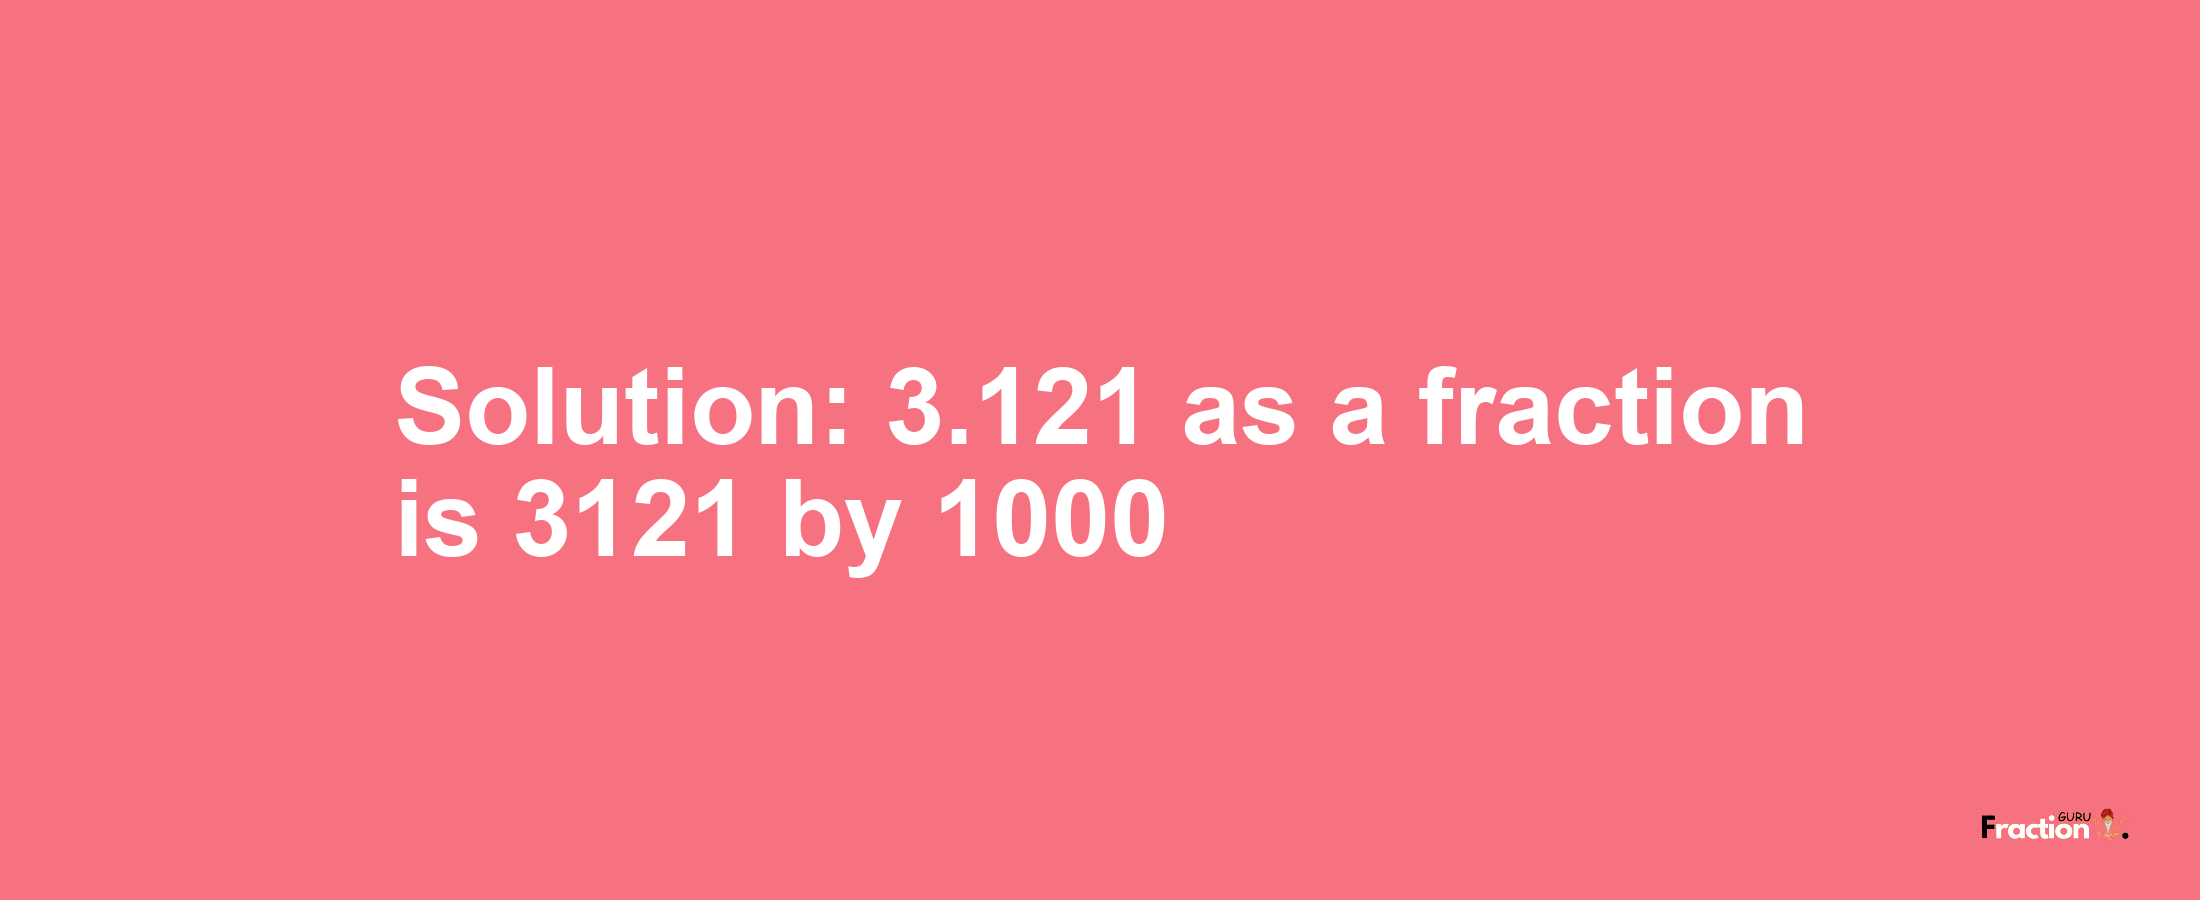 Solution:3.121 as a fraction is 3121/1000